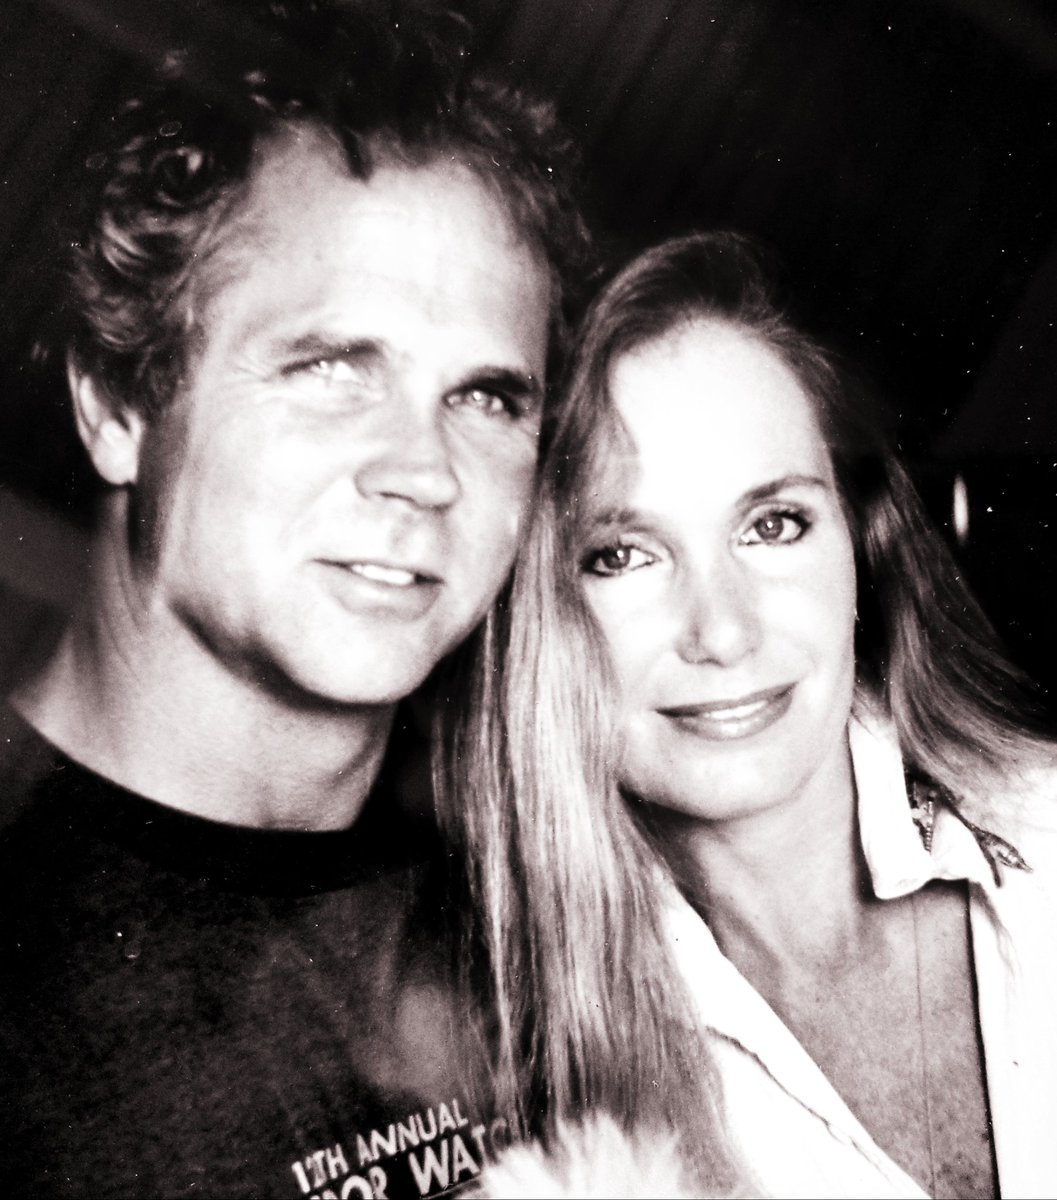 I absolutely adore this photo of Lauren & Tony Dow 💕 This beautiful couple got it right & inspire me to never give up on love~ 💞💗💖 Rest In Power #TonyDow 🙏🏽🌟💔🕊😢😔